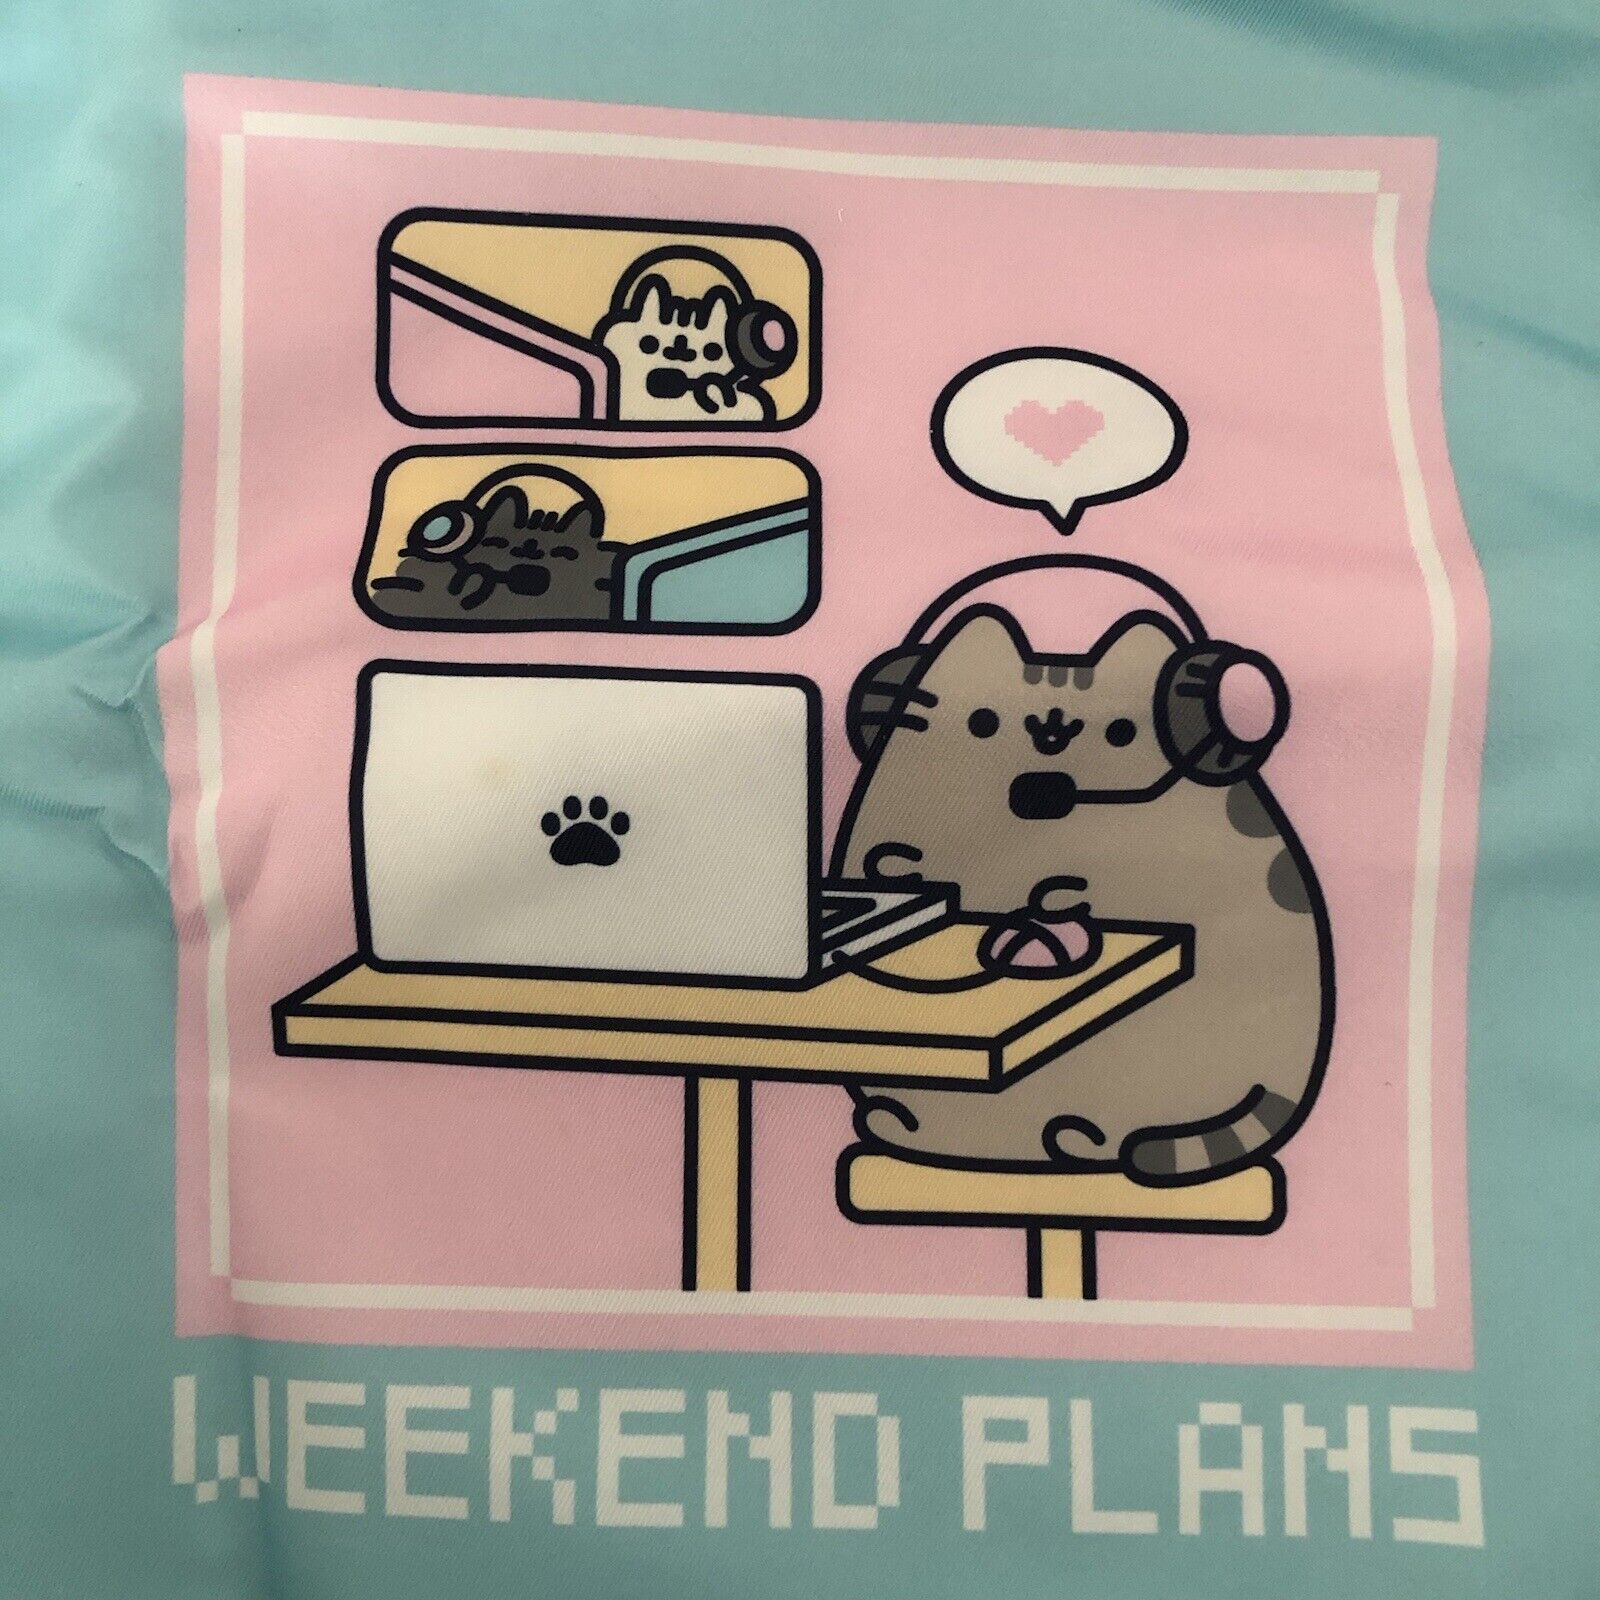 Pusheen Gamer Gaming Device Sleeve Cat Laptop Cover Weekend Plans Box Exclusive